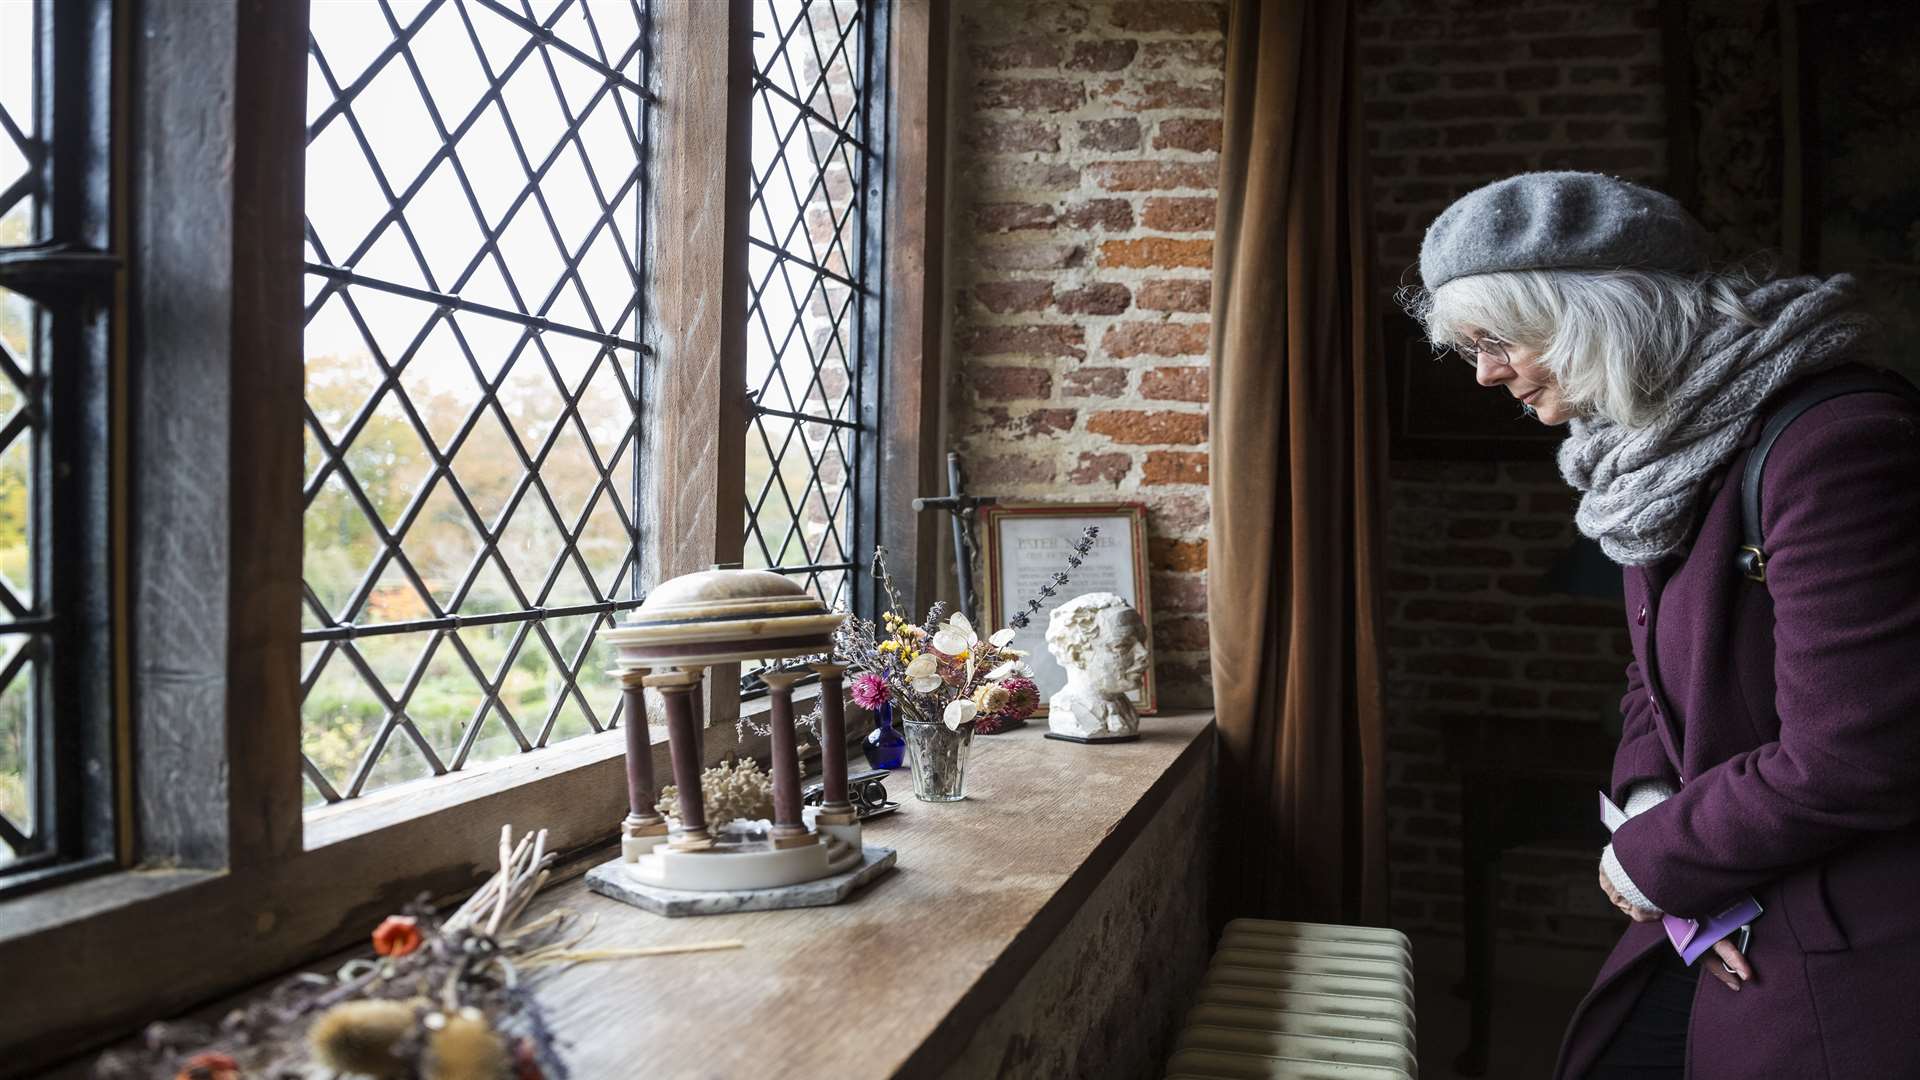 There are plenty of objects and artefacts in the newly-opened South Cottage at Sissinghurst Picture: National Trust/James Dobson